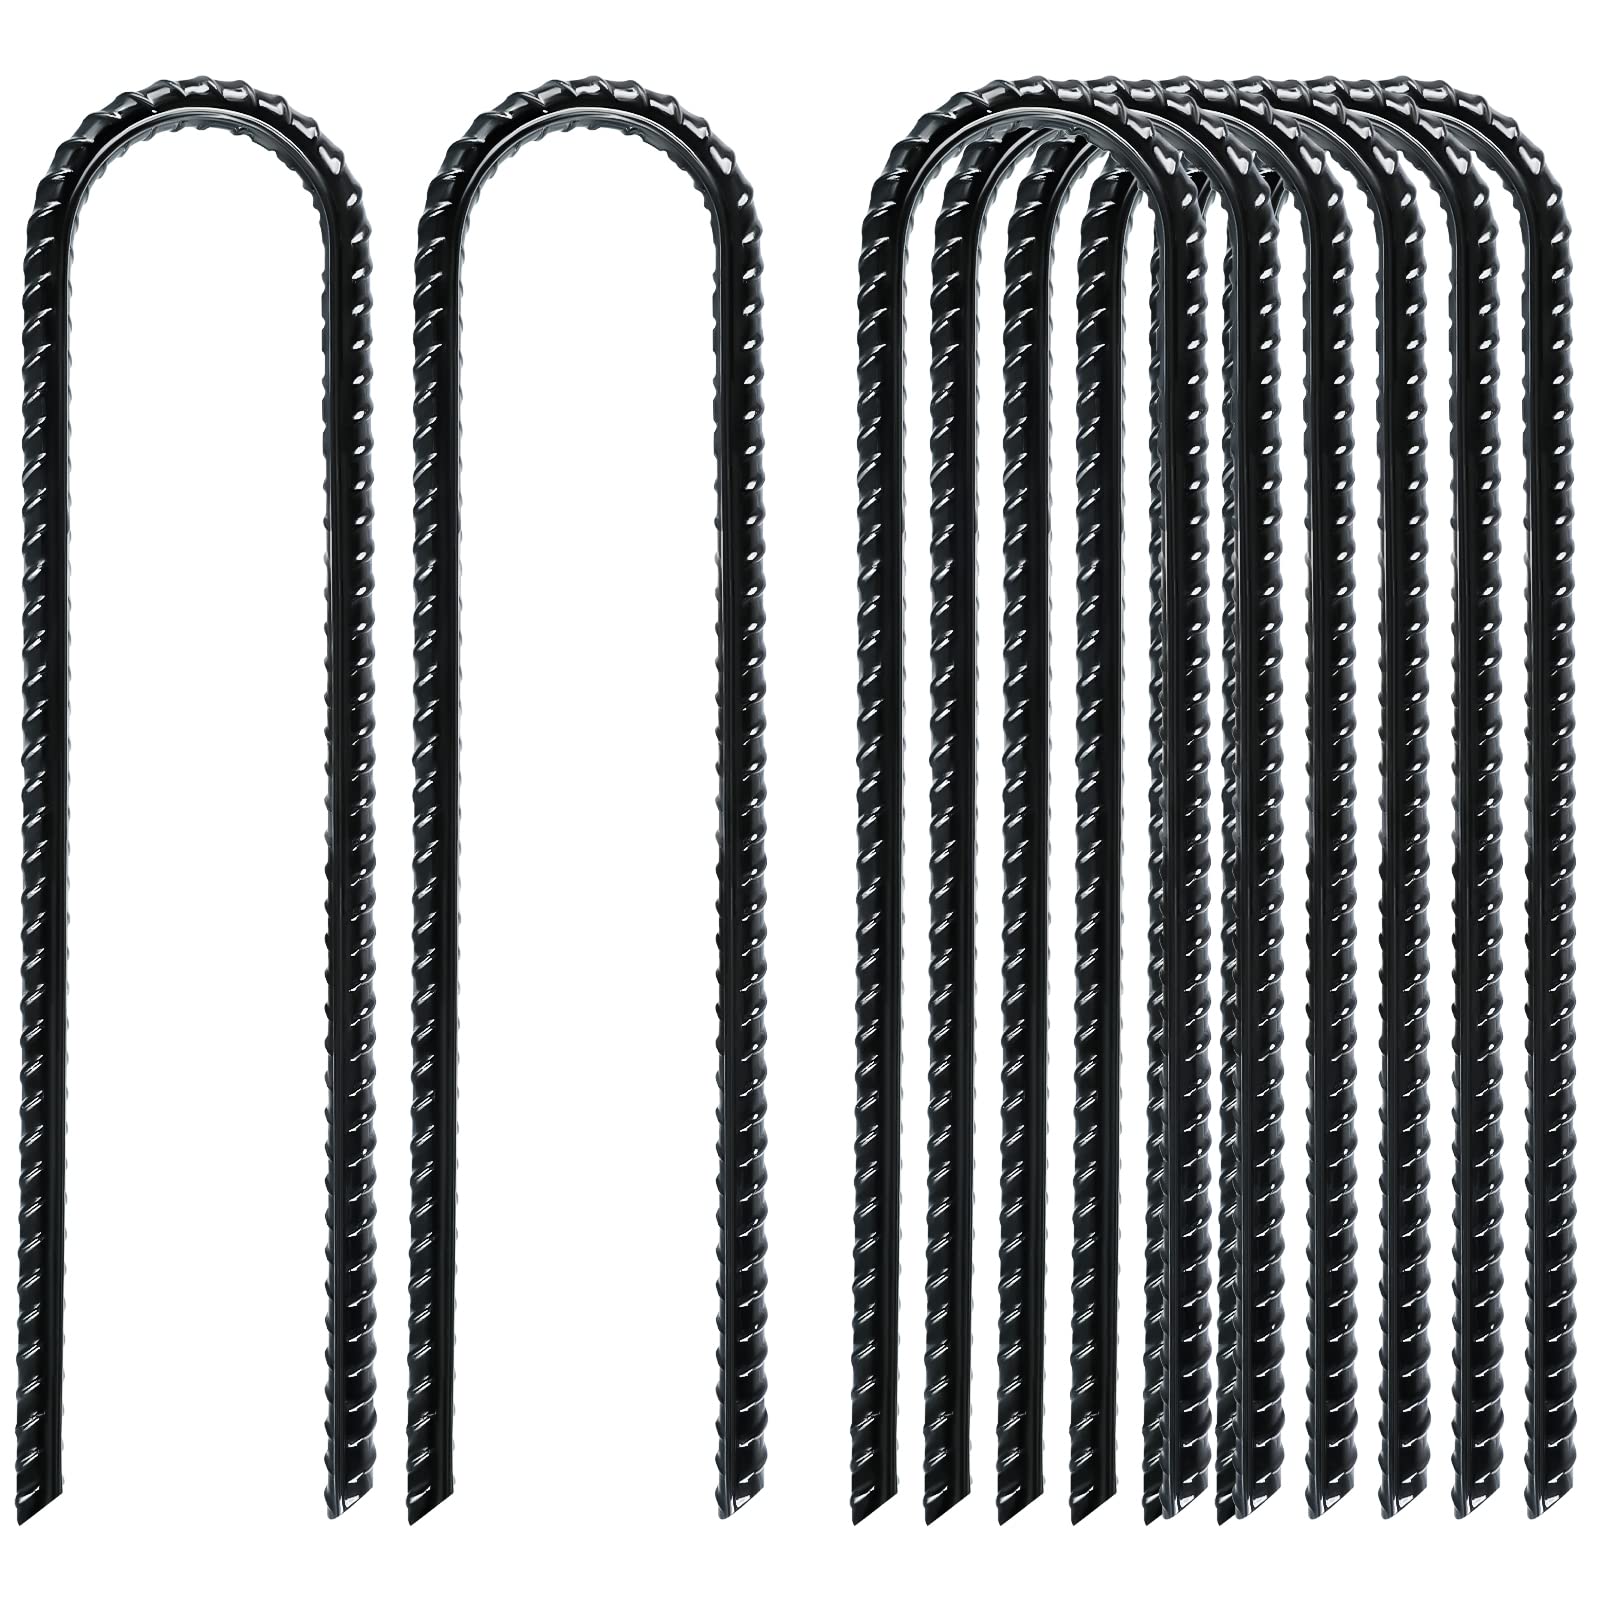 gtongoko Trampolines Wind Stakes 8 Pack 12 Inch, Heavy Duty U Shaped Rebar Stake ground Anchors galvanized Steel Safety Trampoli